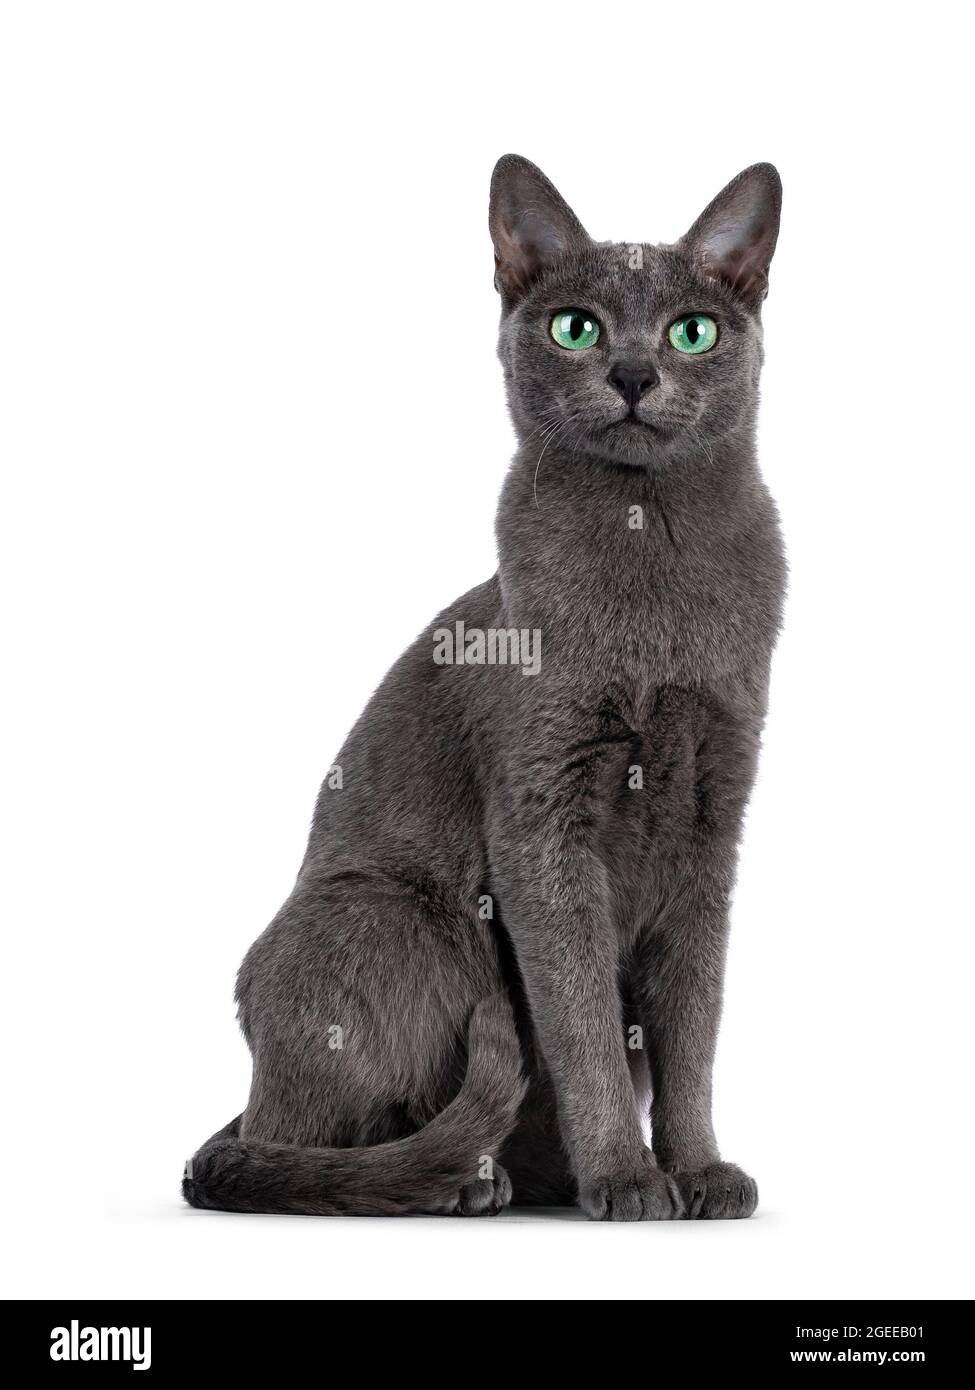 Young silver tipped Korat cat, sitting up like statue. Looking towards camera with bright green eyes and attitude. Isolated on a white background. Stock Photo